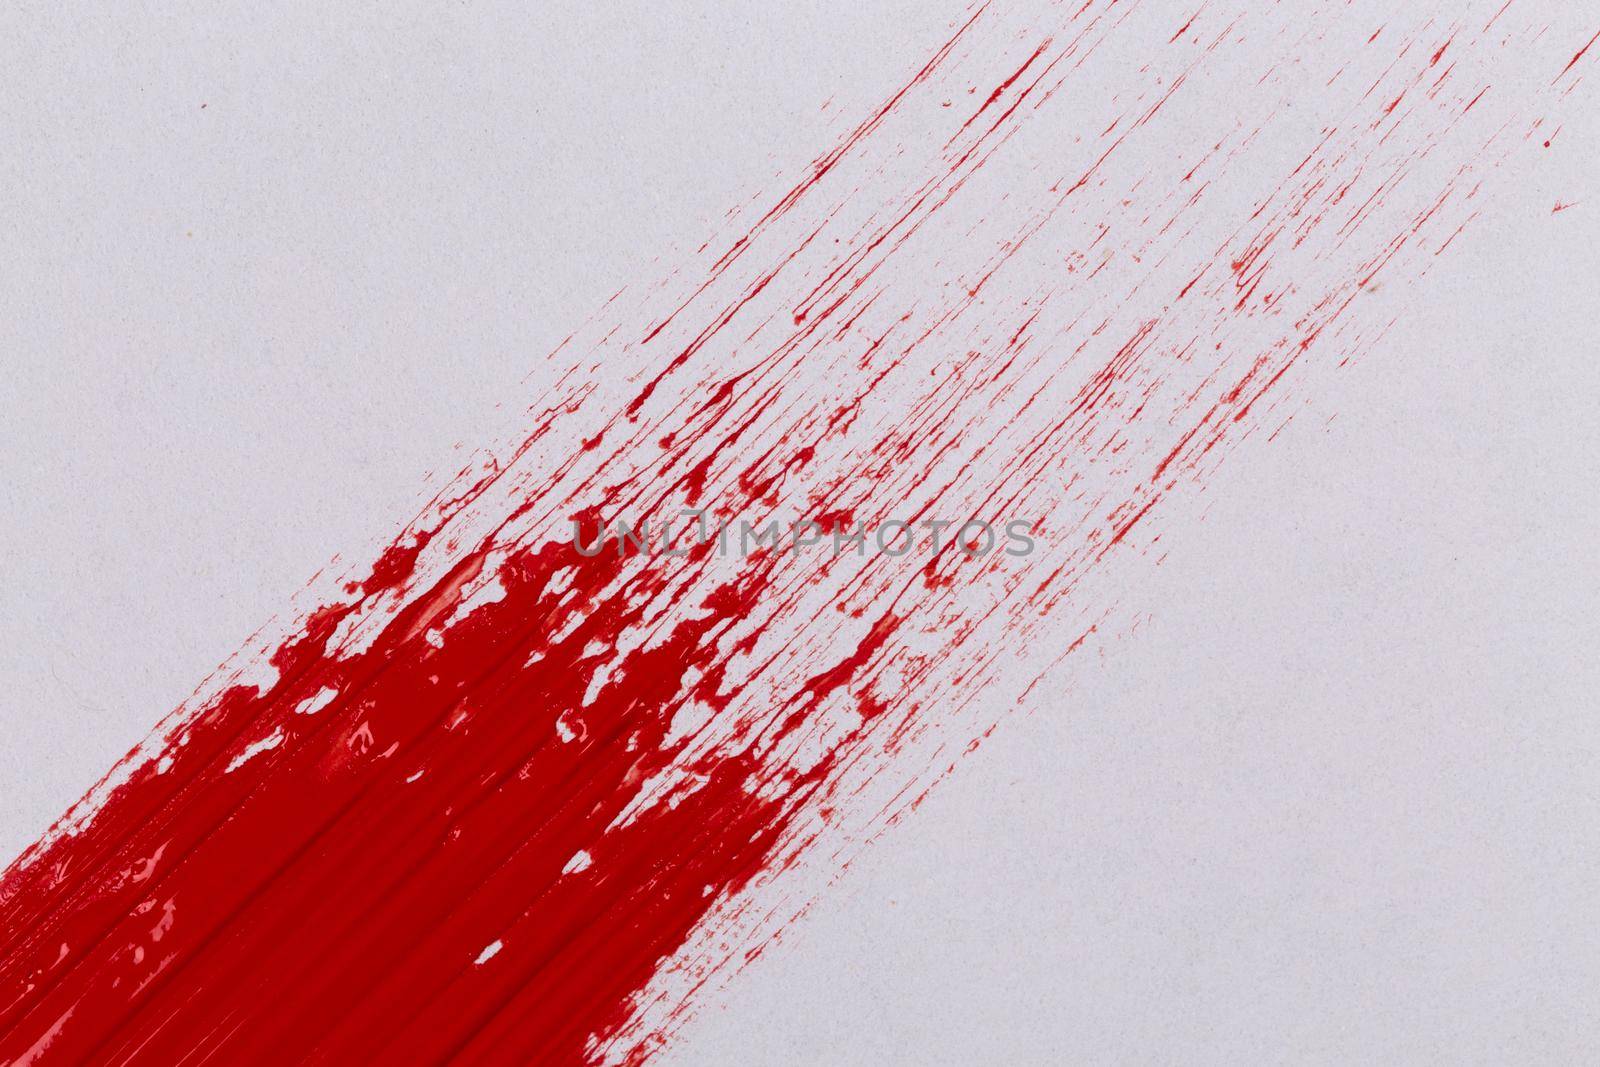 Red paint splash on a white paper